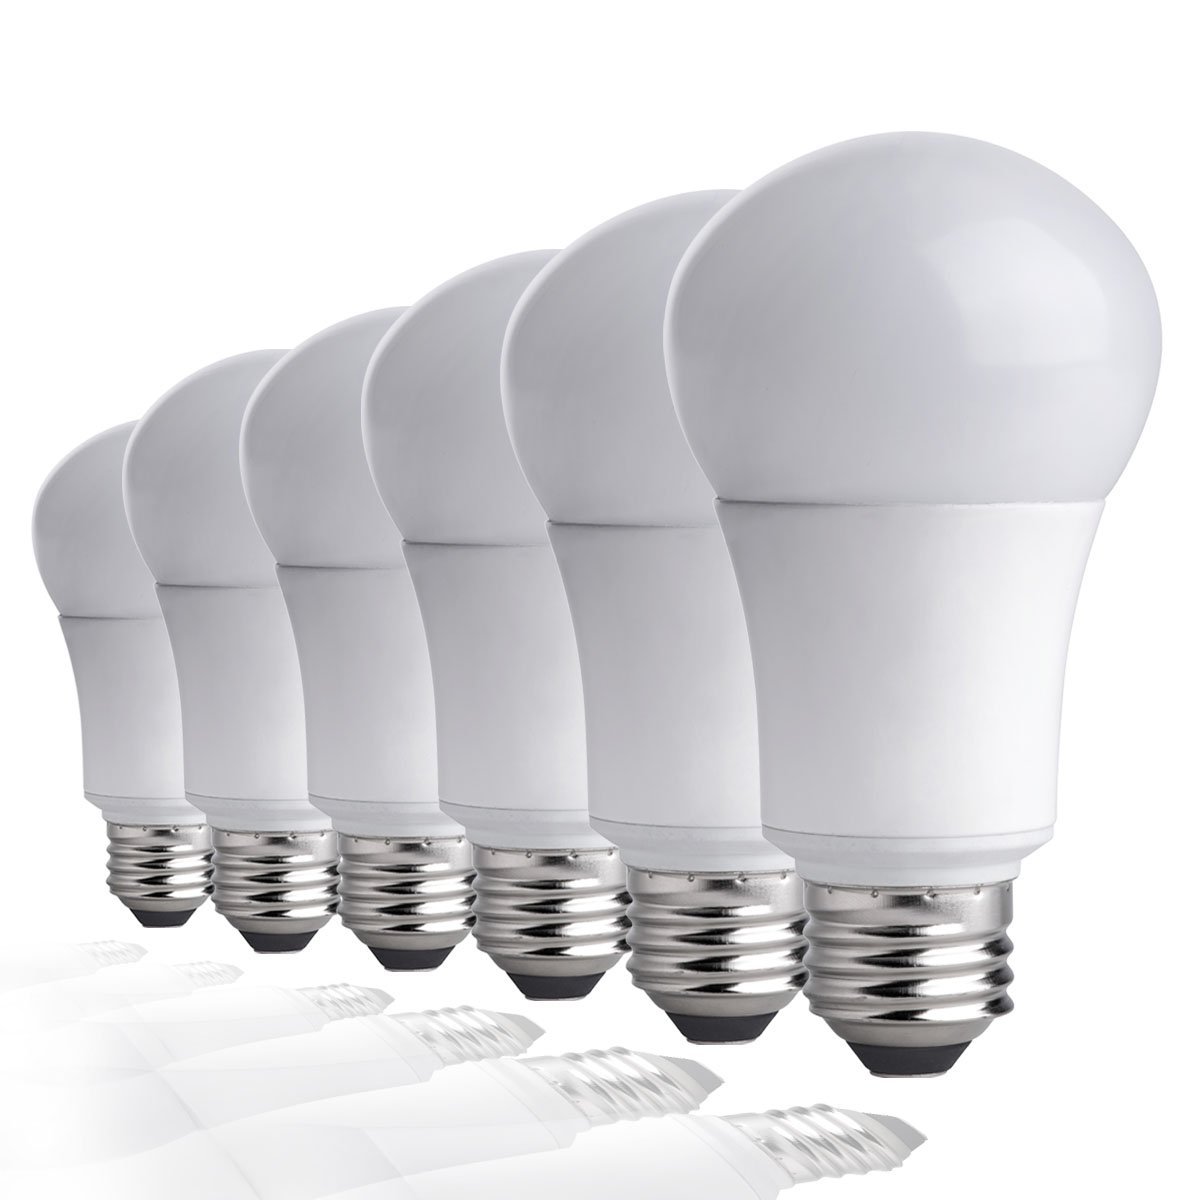 Today only: Save up to 75% on recessed lighting & LED light bulbs